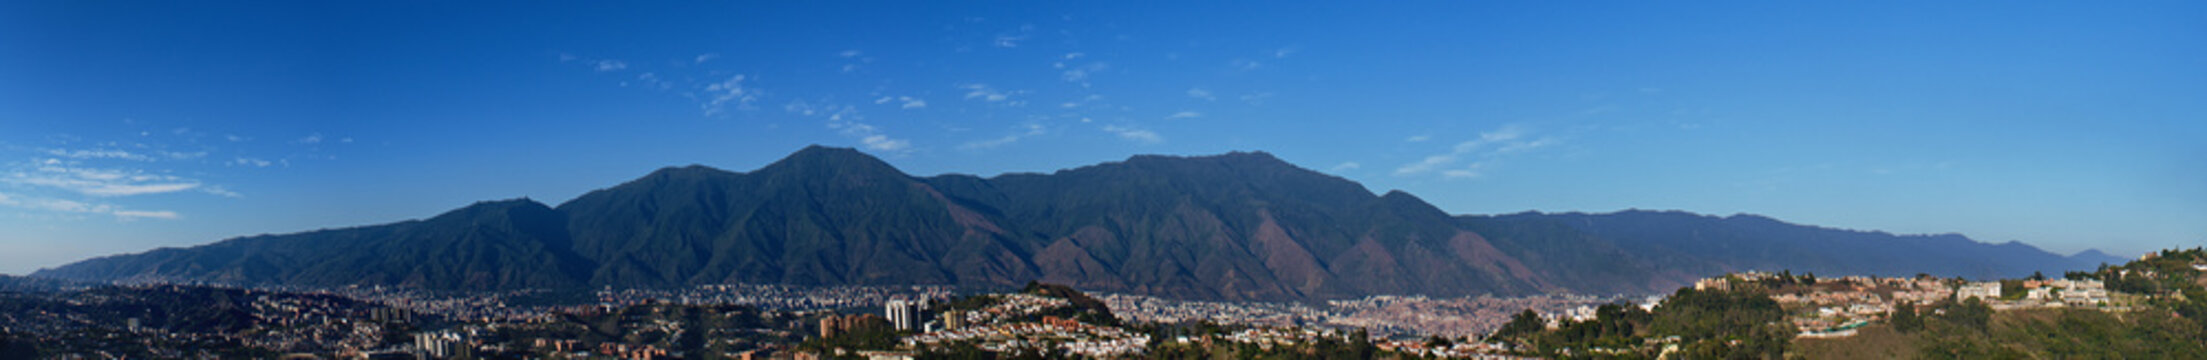 Panoramic View Of Mountains Against Blue Sky